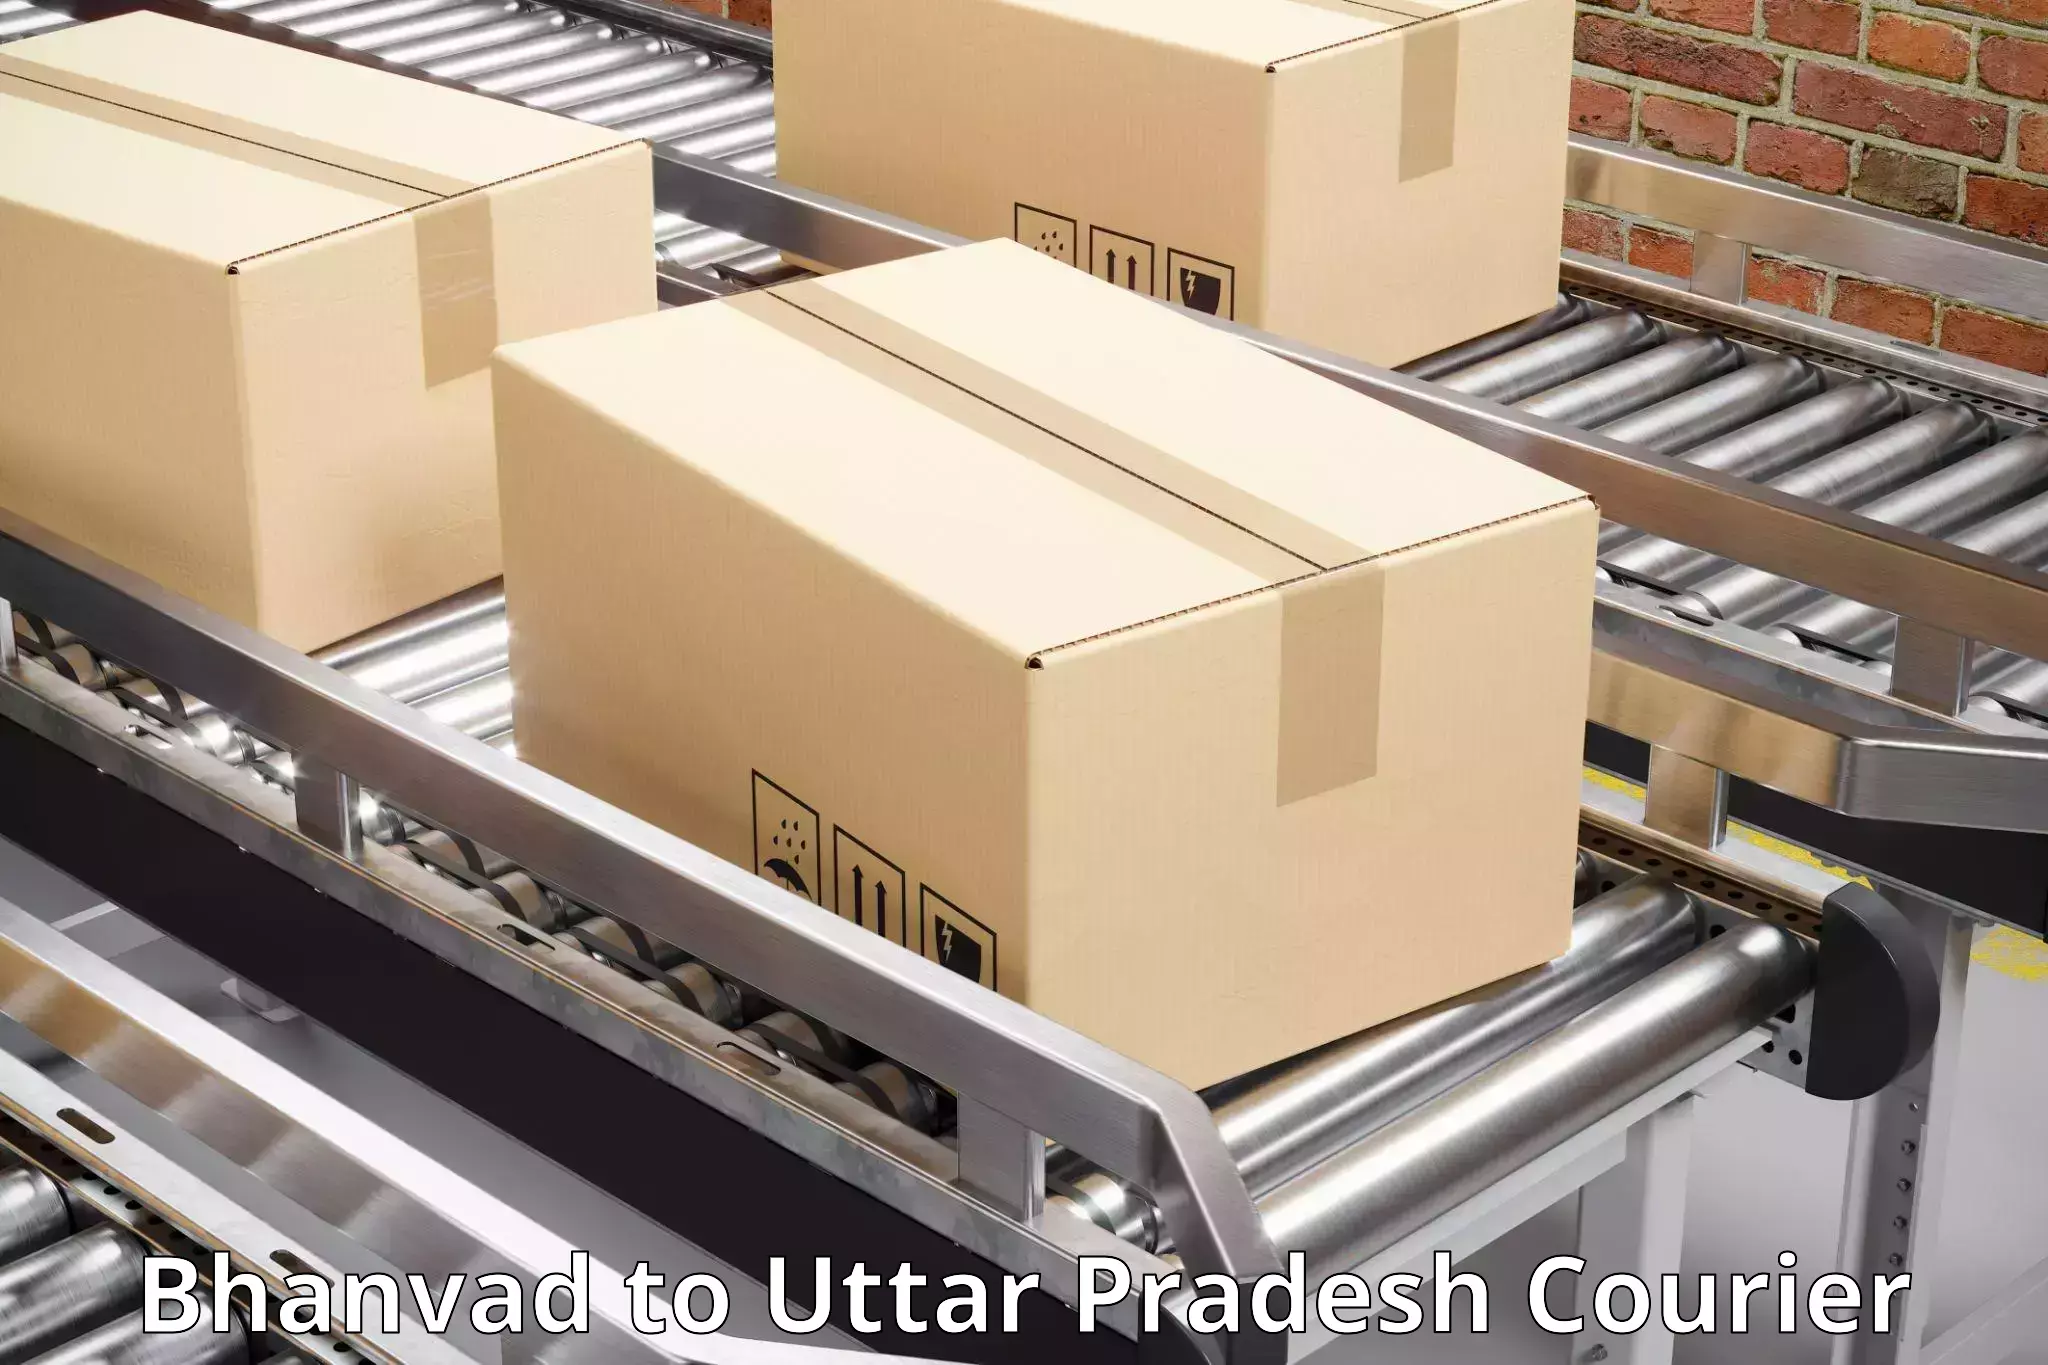 International courier rates in Bhanvad to Kaushambi